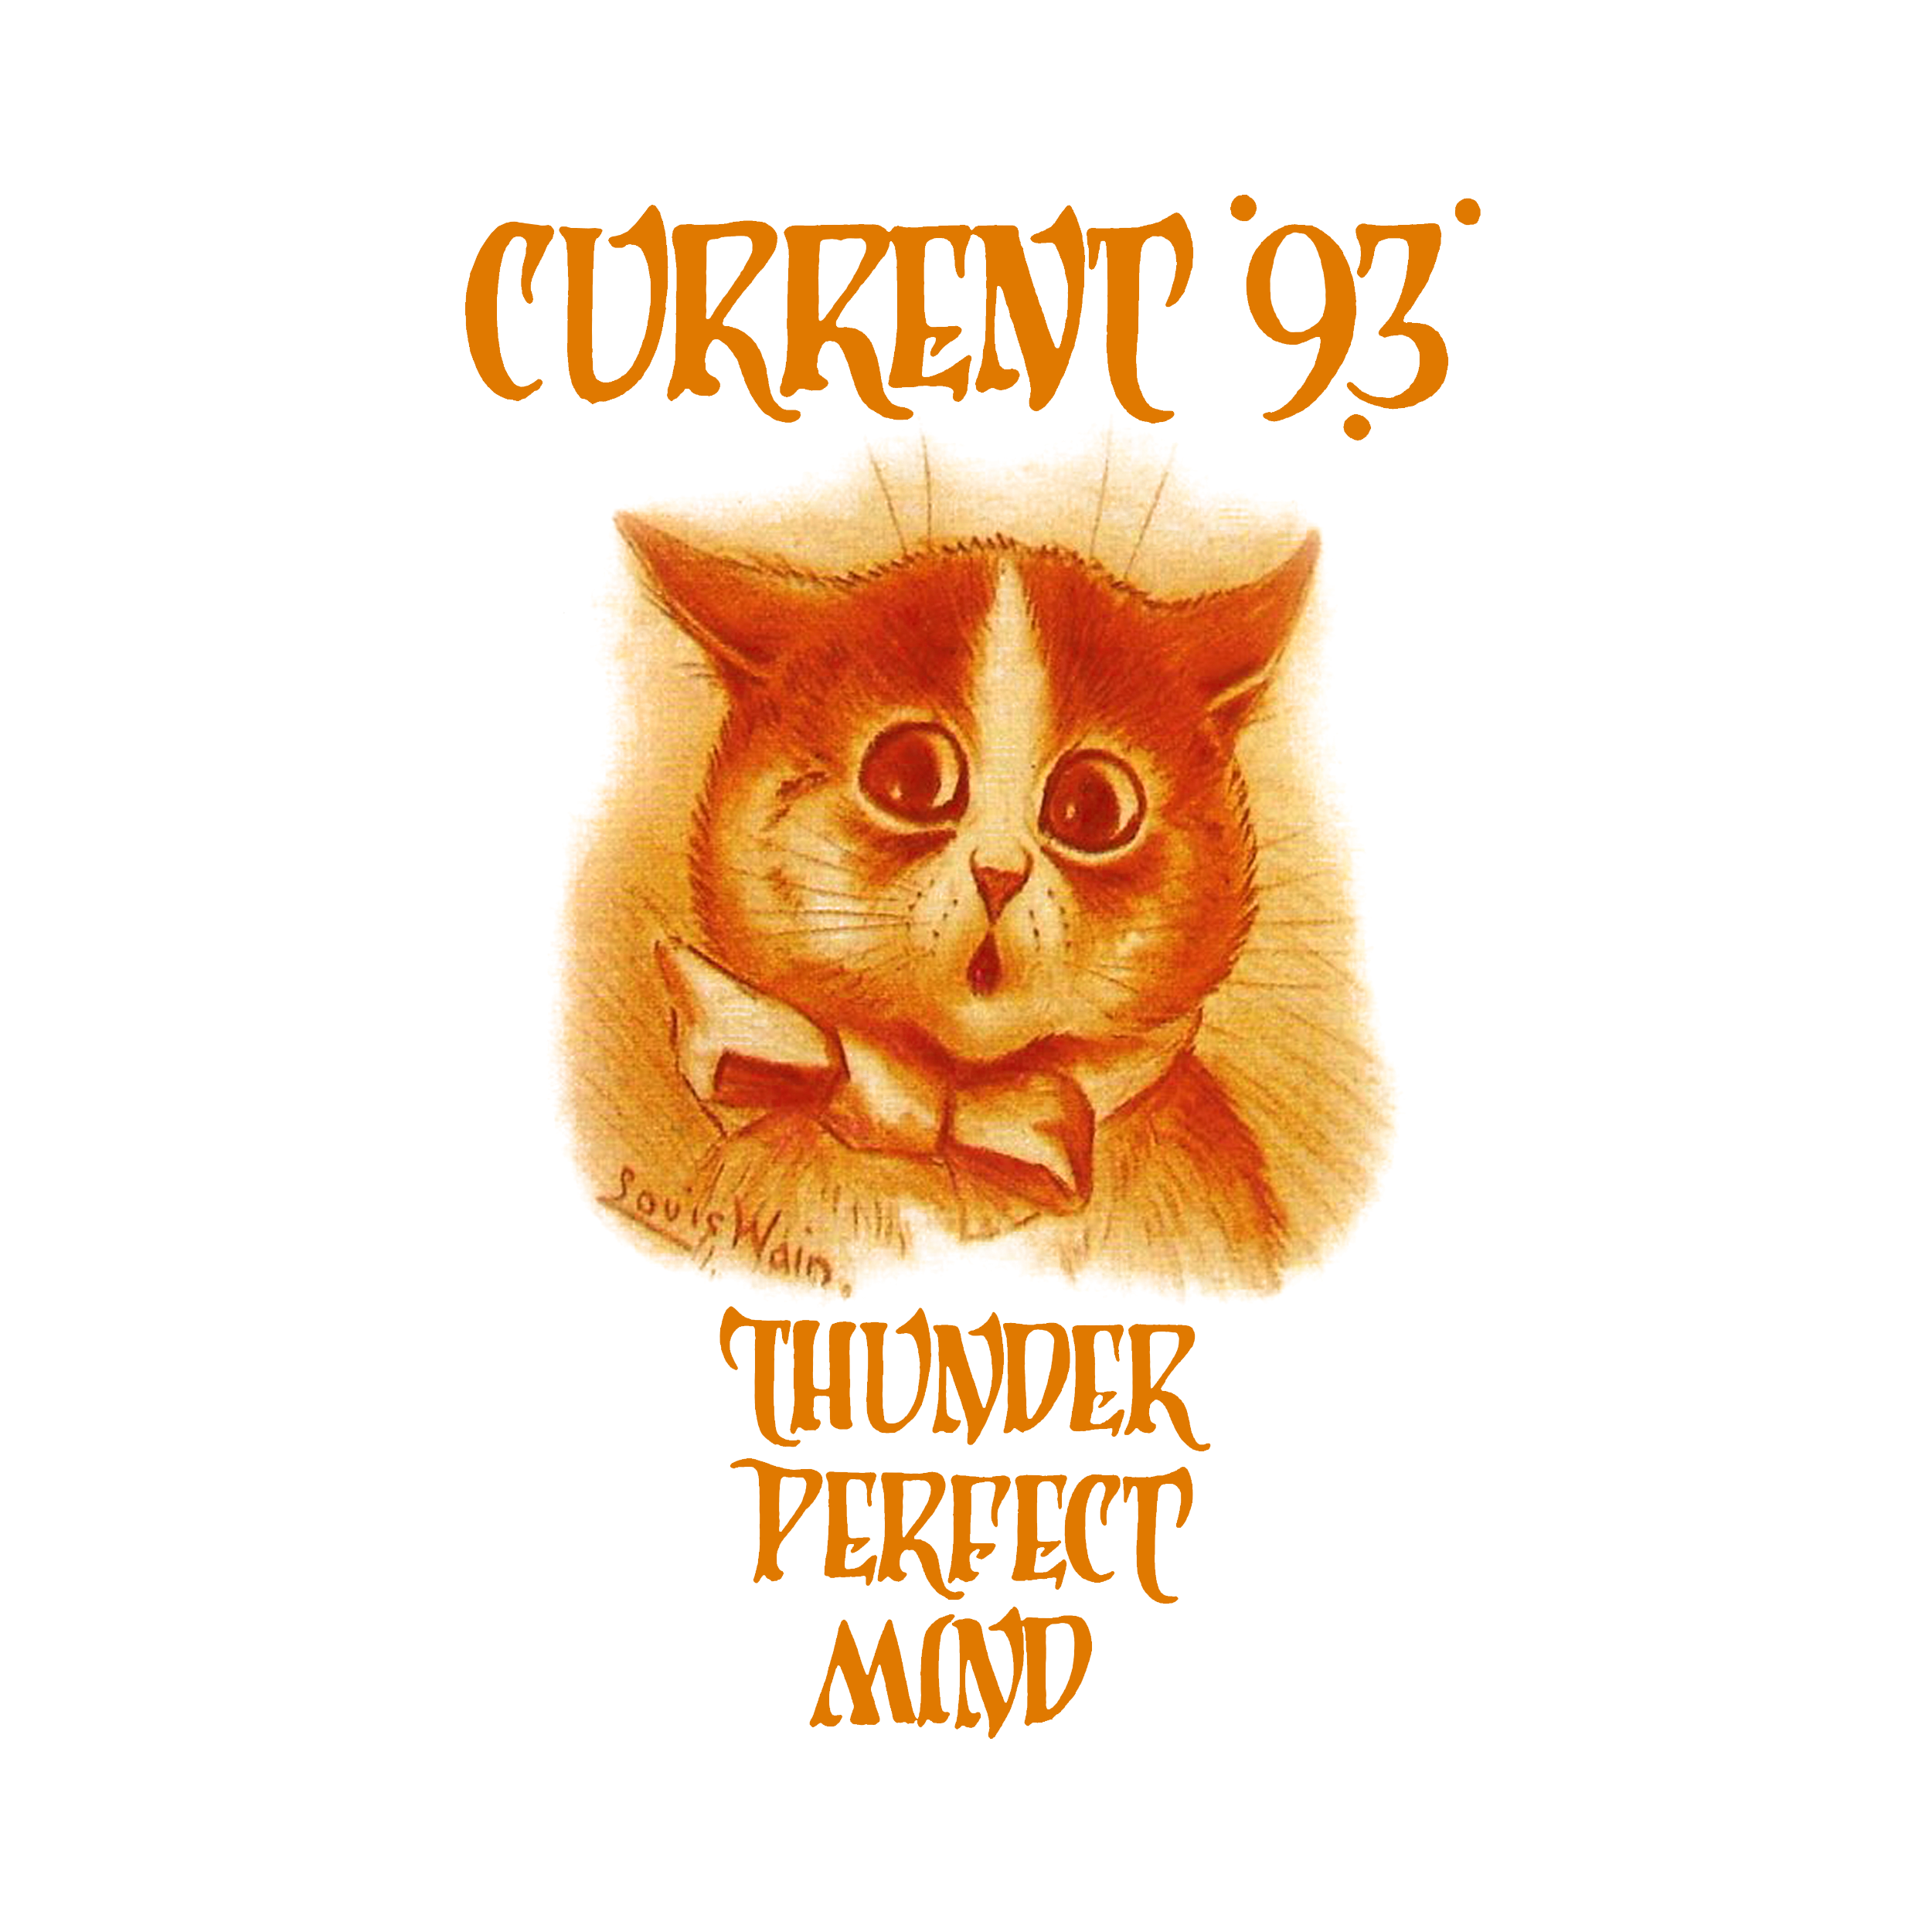 Current 93 Thunder Perfect Mind Classic Tee